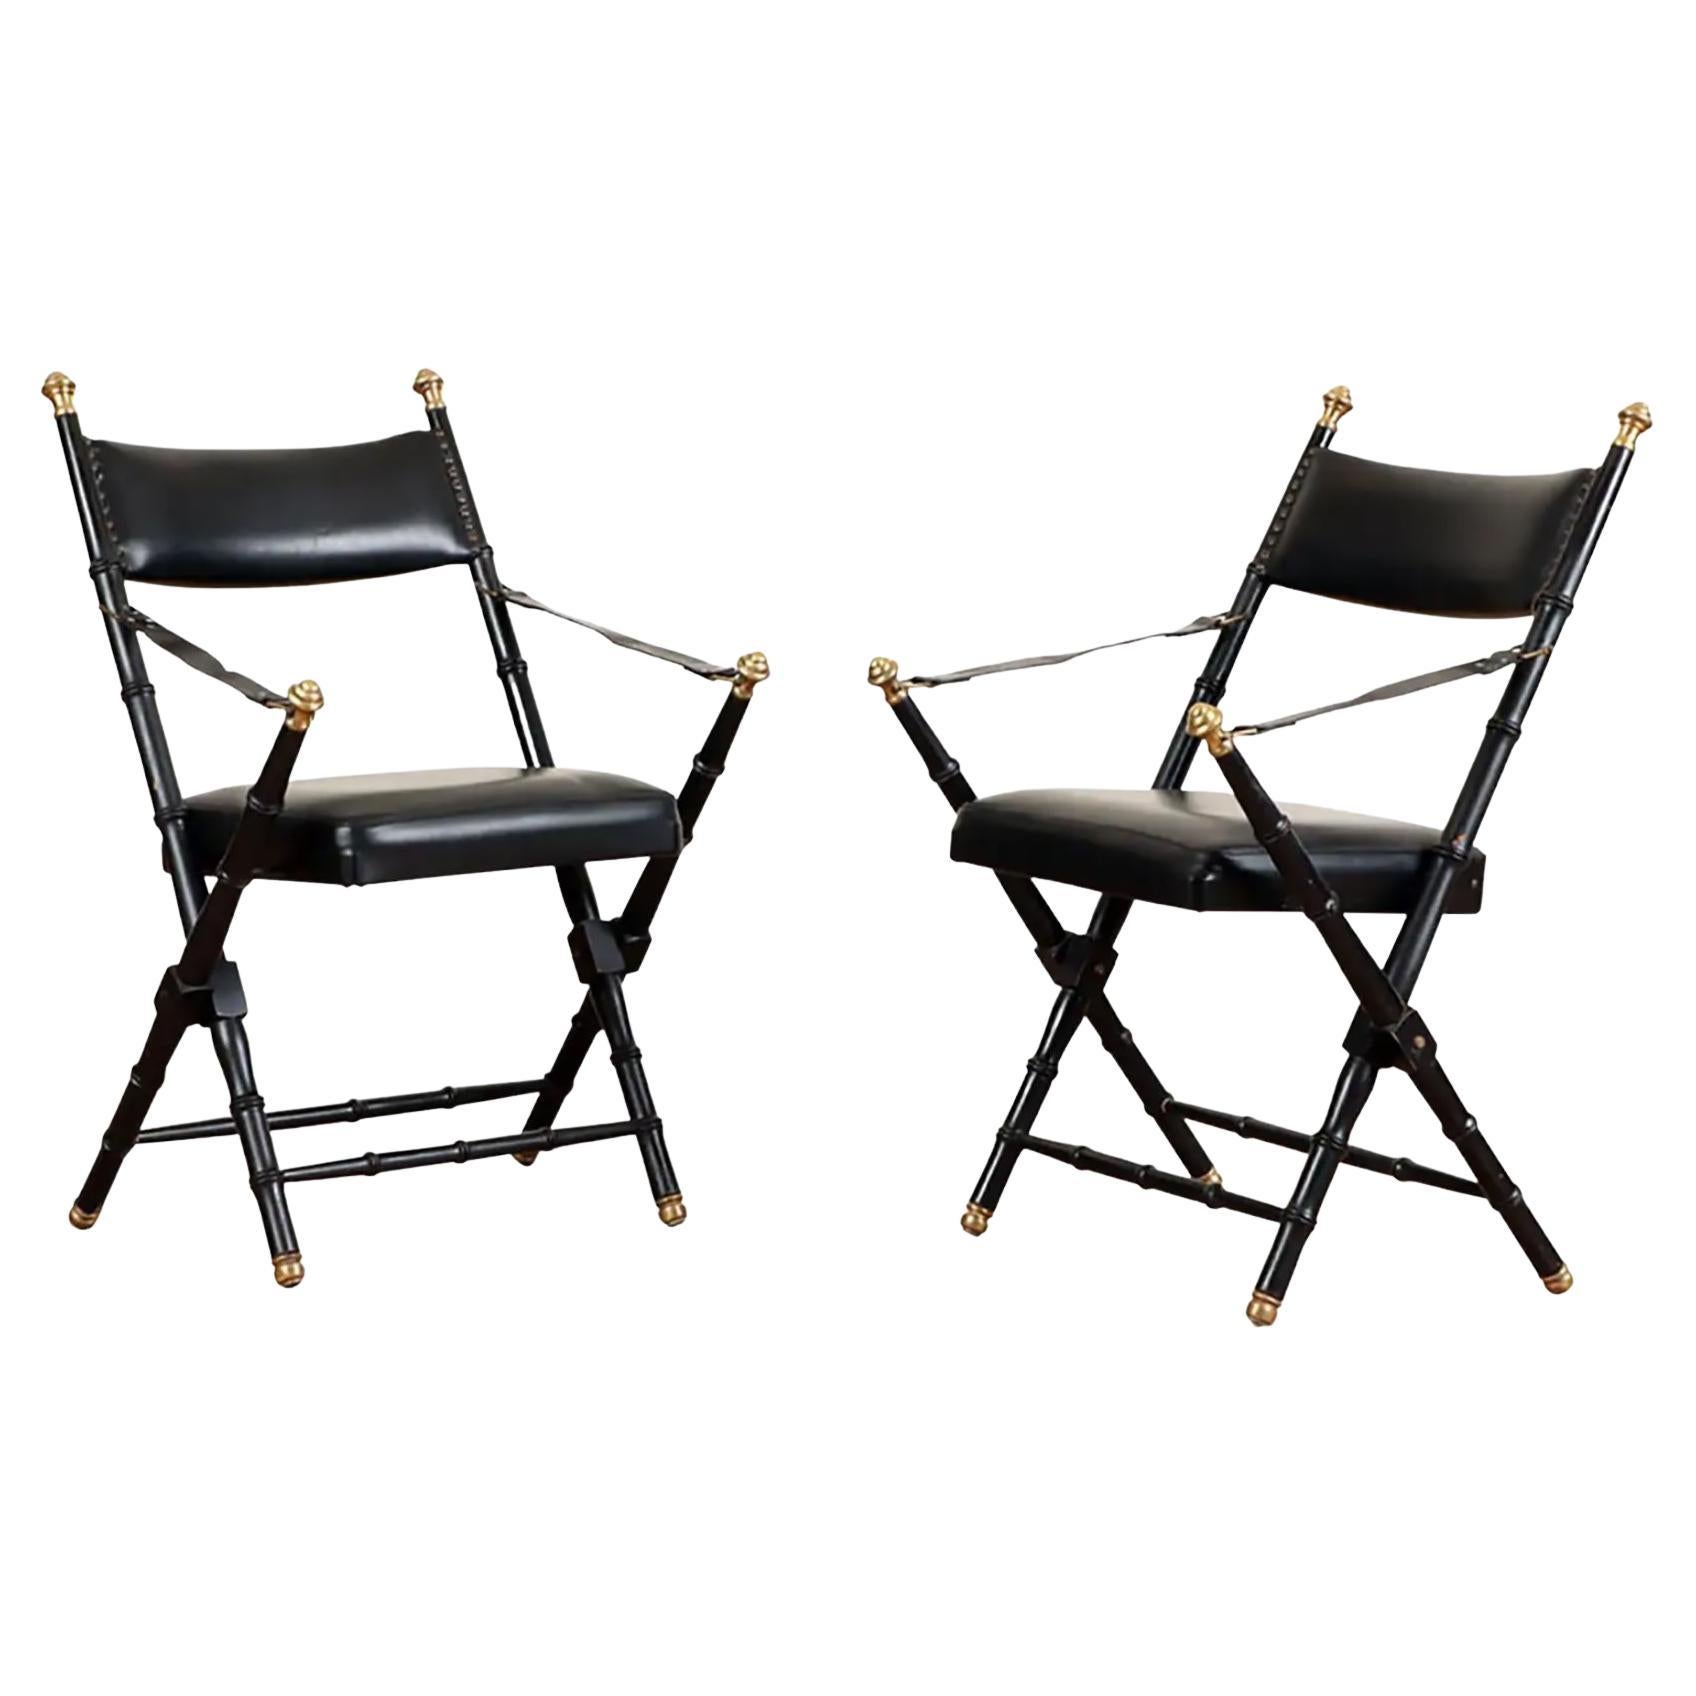 Pair of French Campaign-Style Leather Folding Chairs with Faux-Bamboo Frames